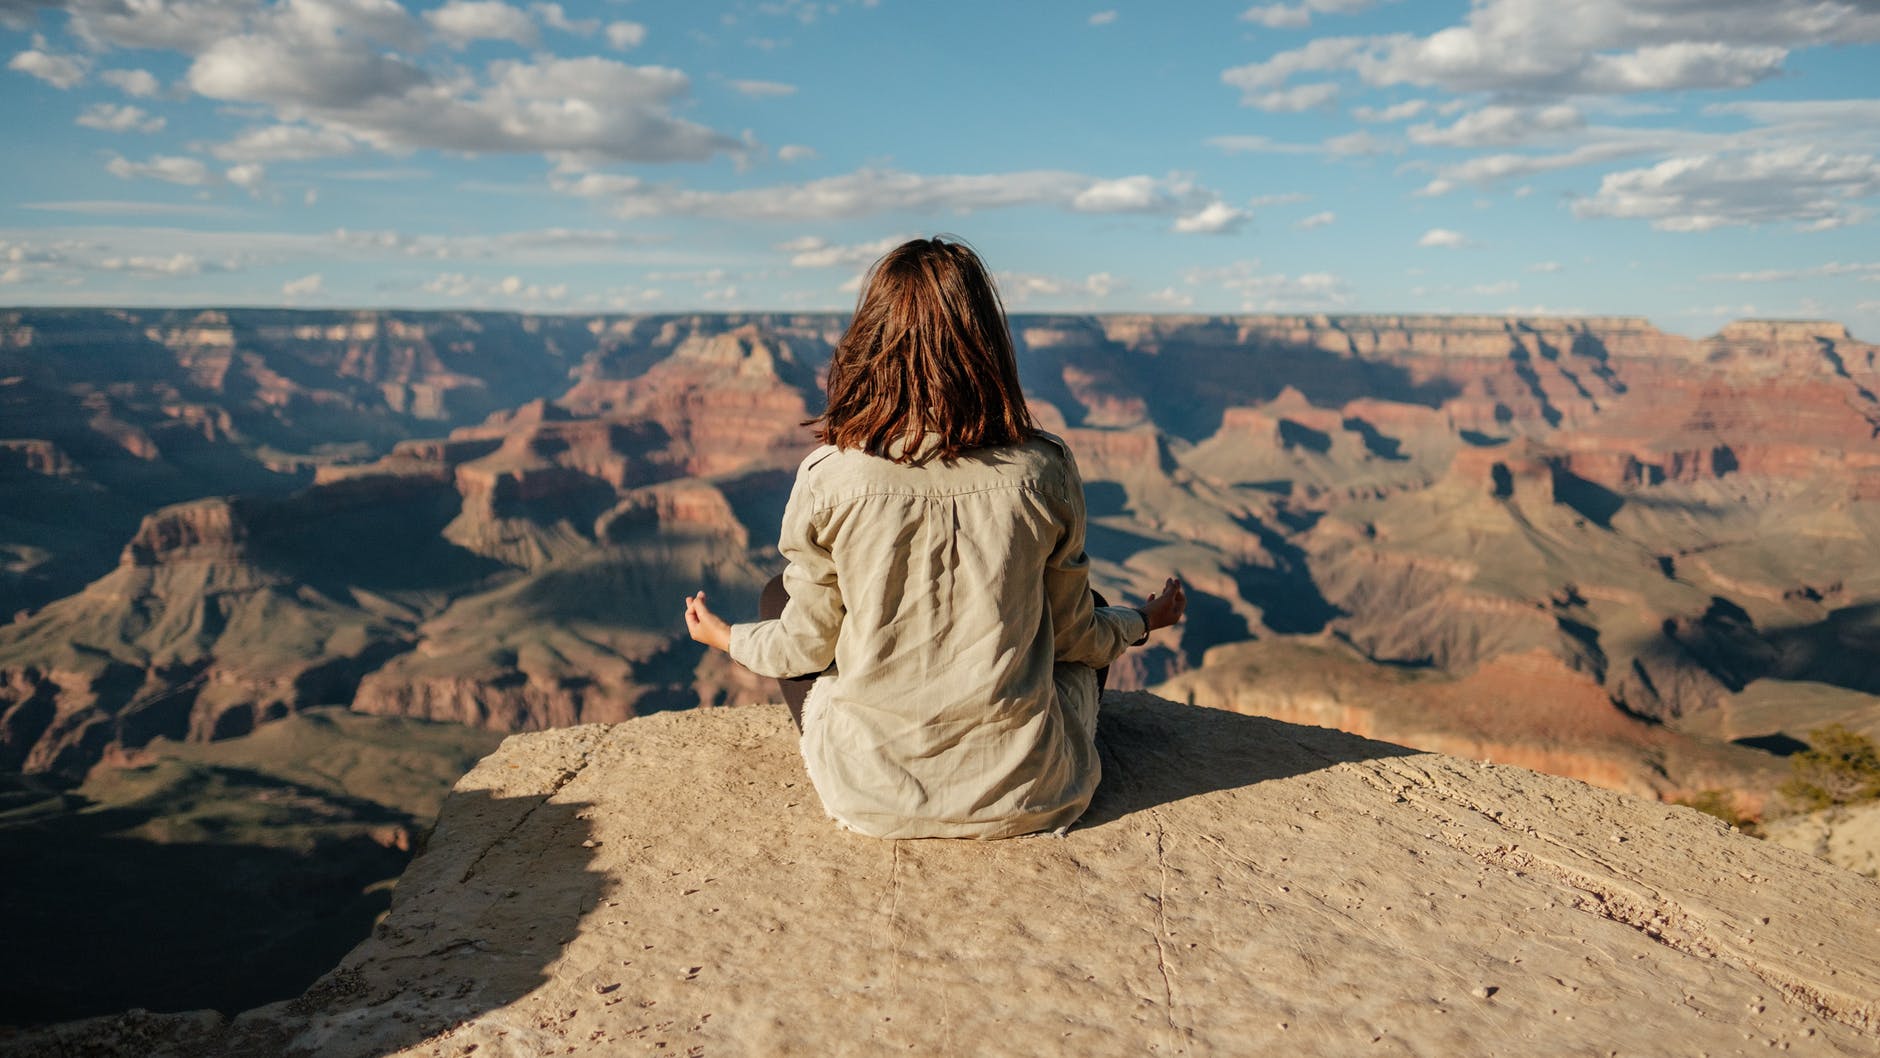 Top 5 reasons to meditate while traveling